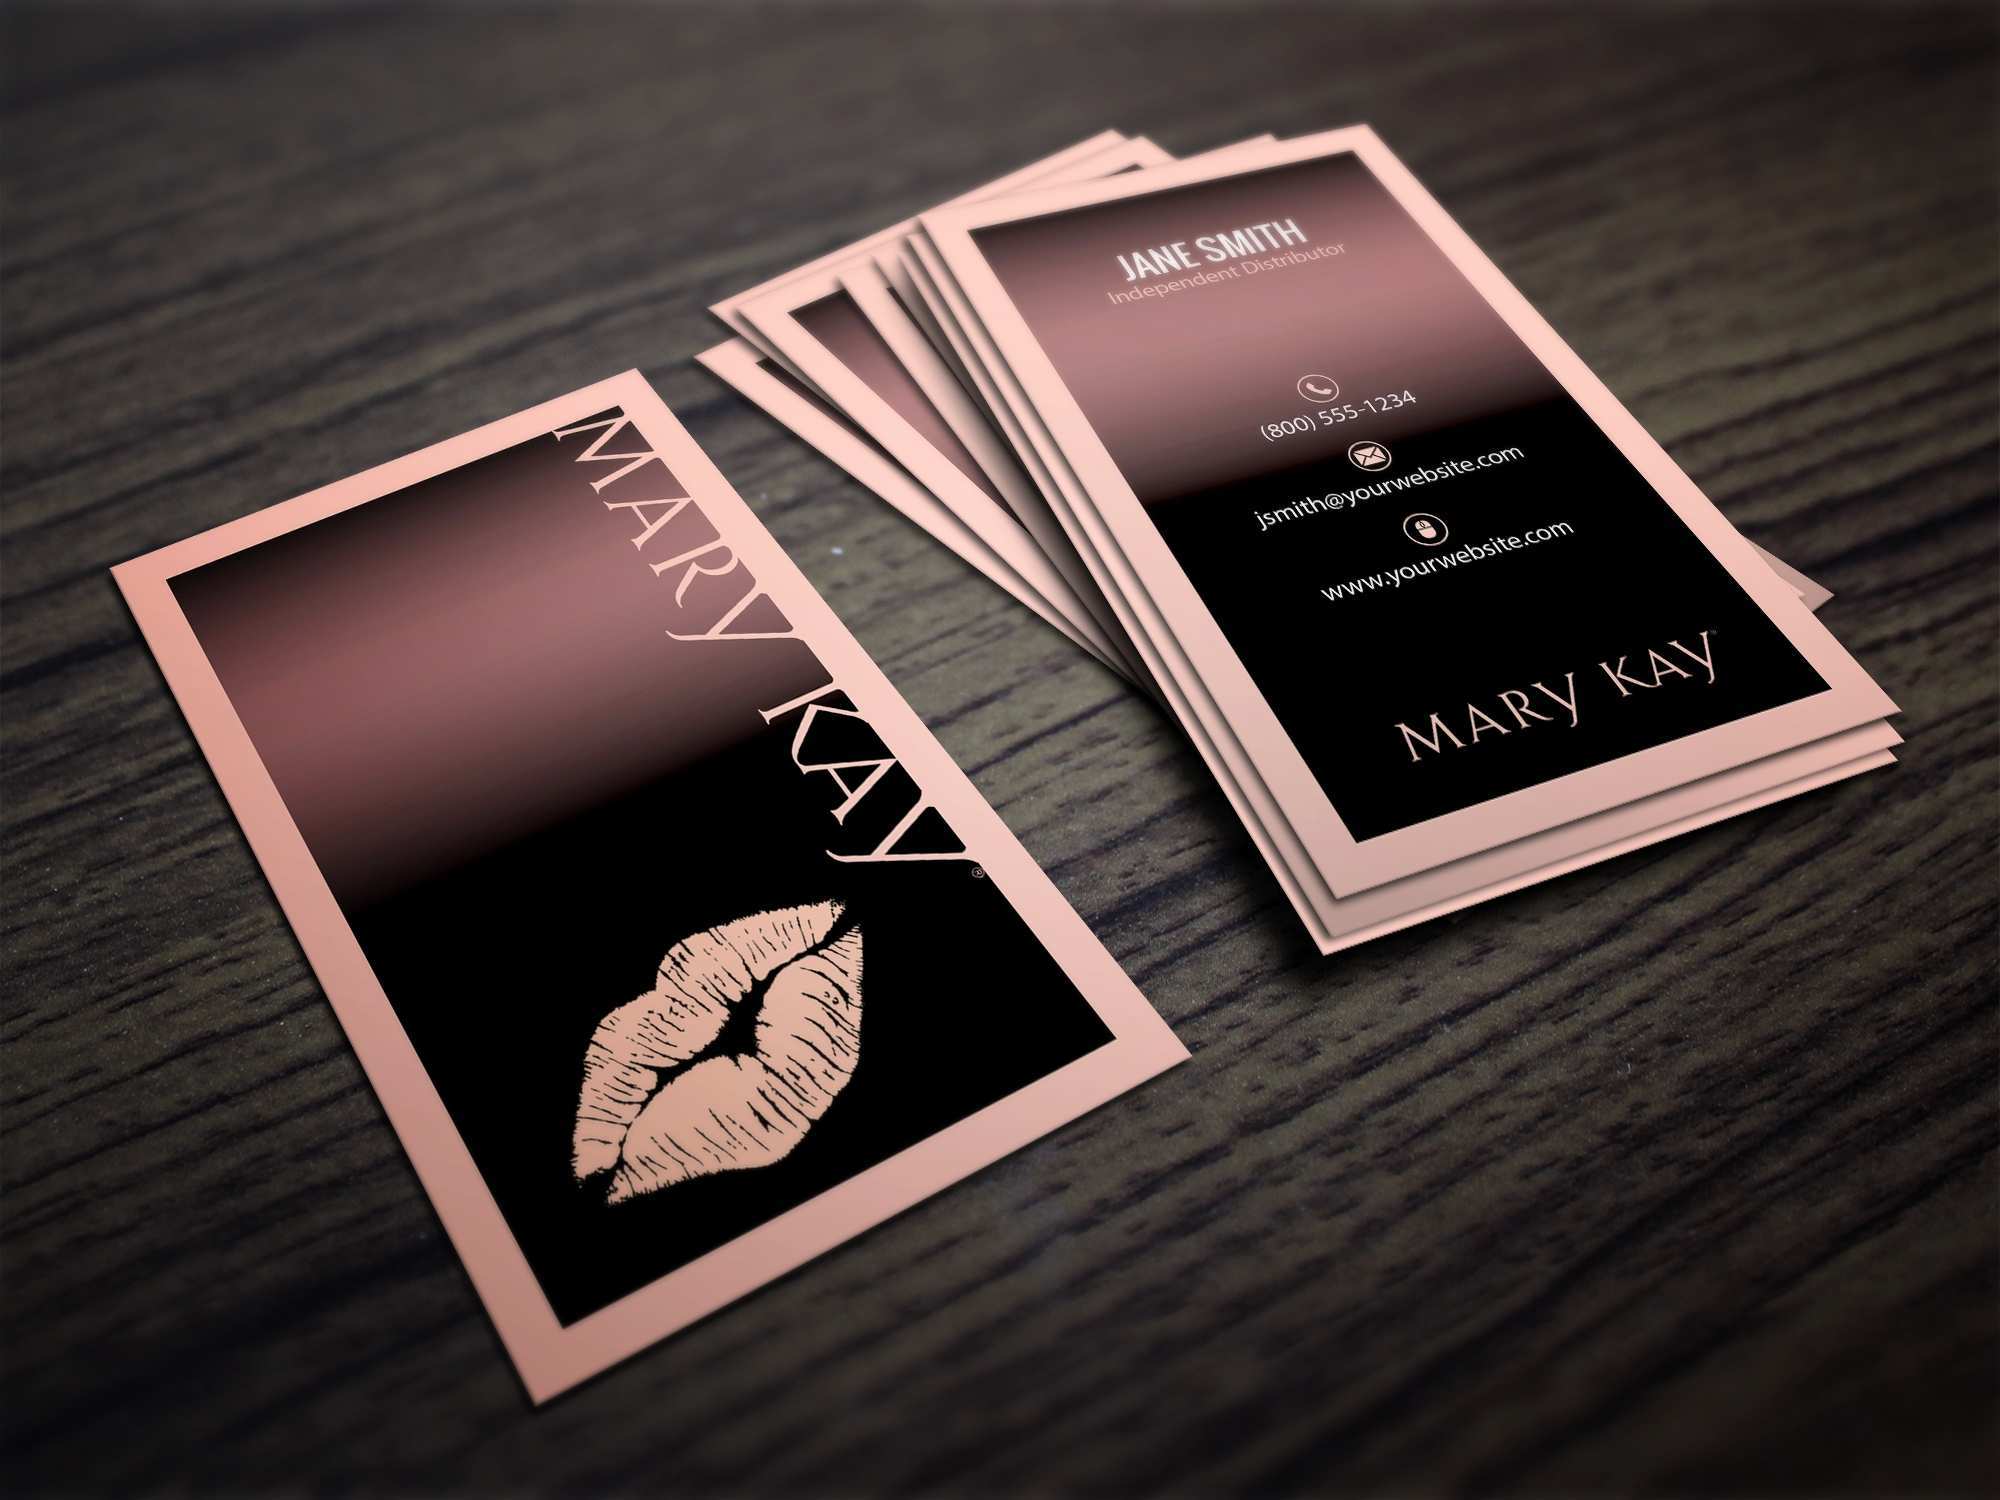 21 Mary Kay Business Card Template Free Photo for Mary Kay With Regard To Mary Kay Business Cards Templates Free